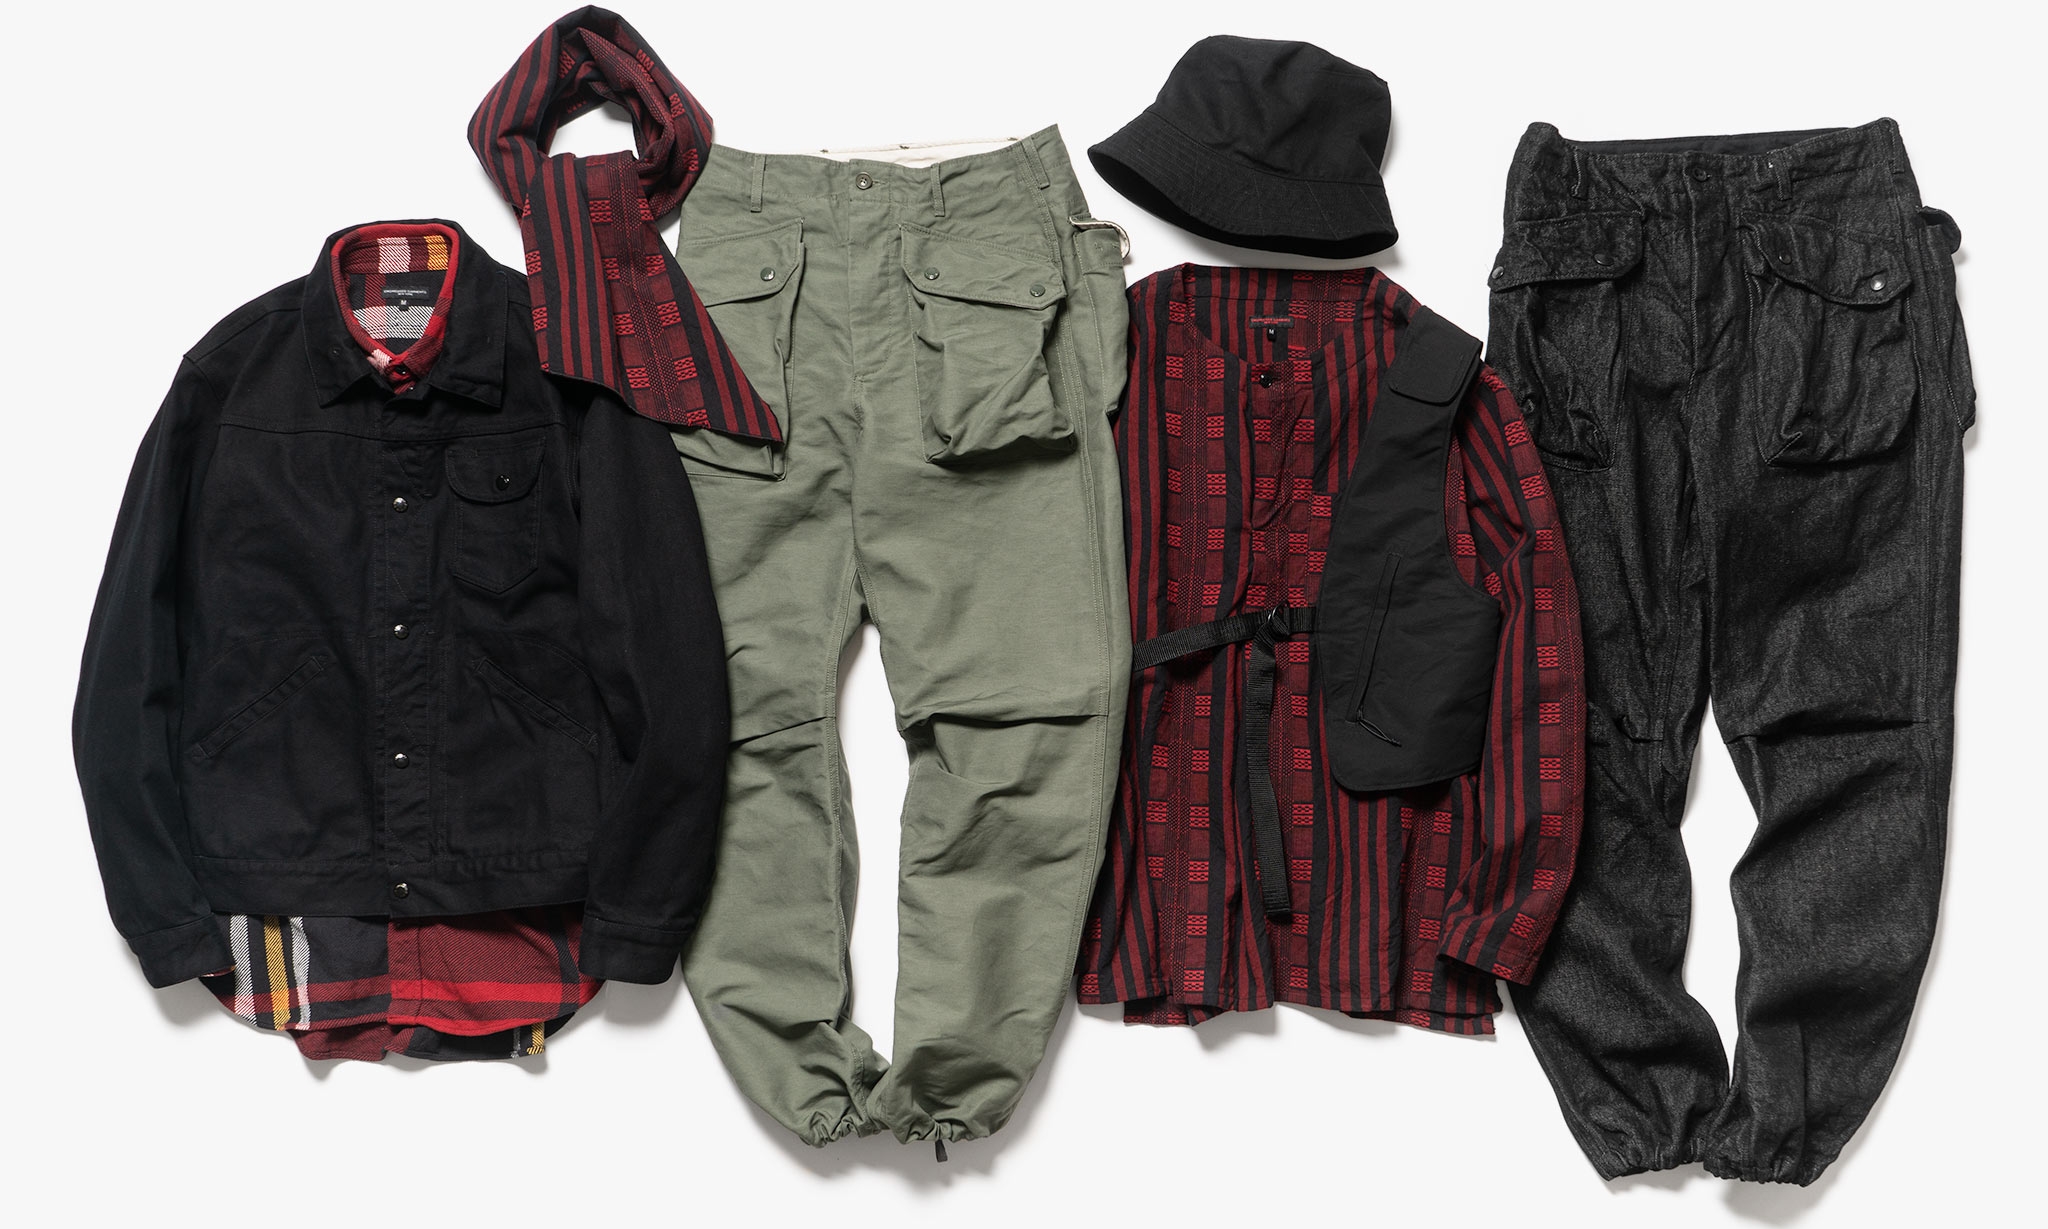 The first Autumn delivery from Engineered Garments is now available — eye_C